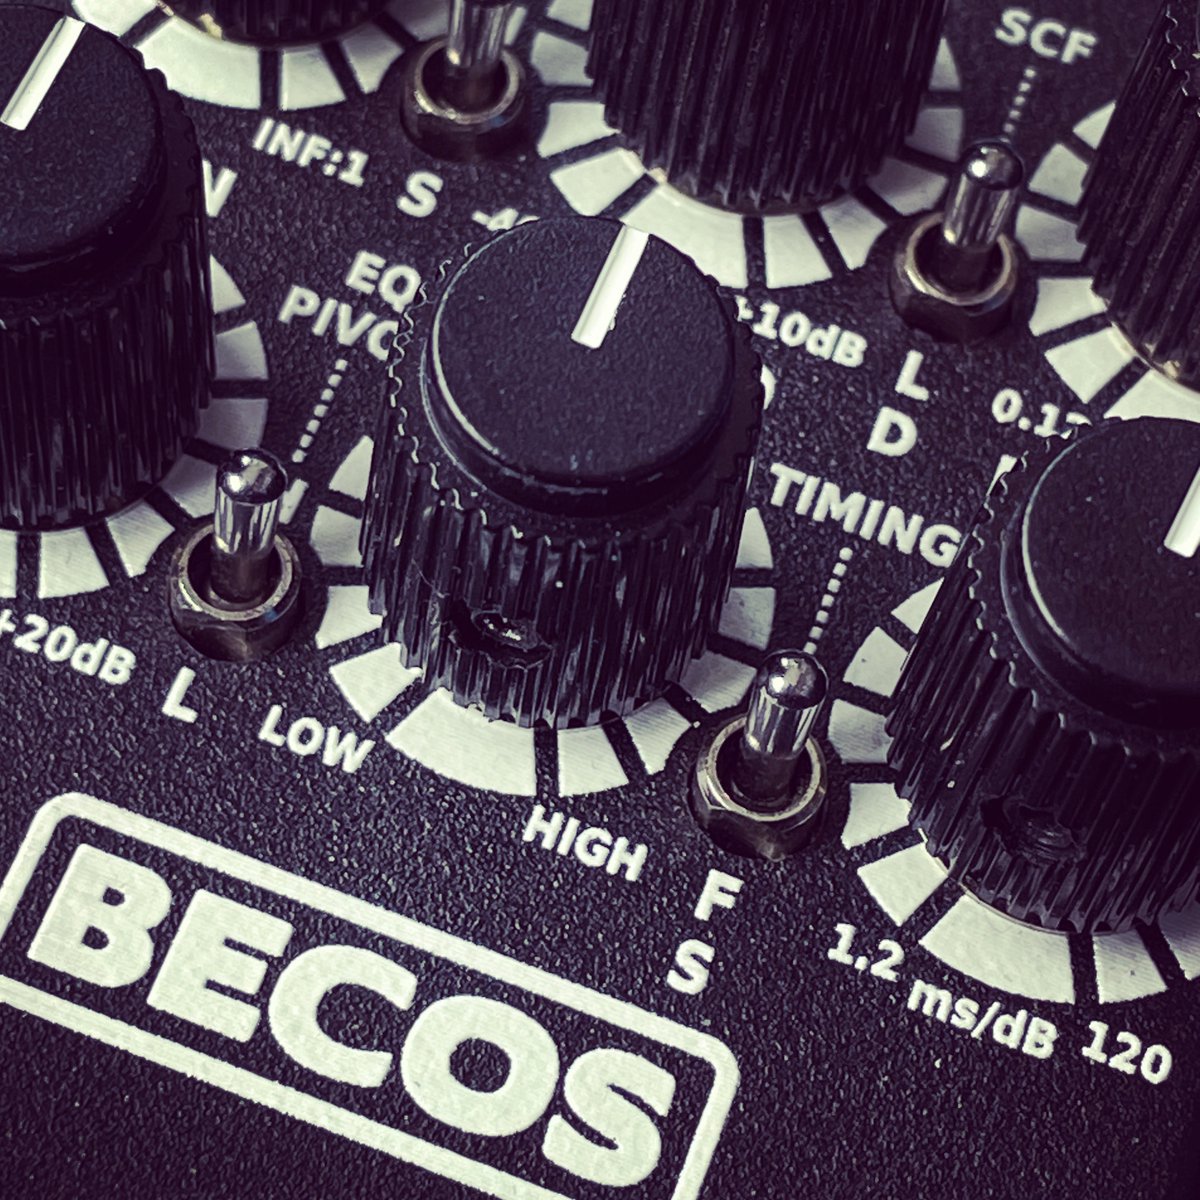 Auto Timing vs. Manual Attack & Release Timings ⏱️ what settings are you using for compression timing?

#becosfx #compiqstella #compressorpedal #vcacompressor #studiocompressor #basscompressor #guitarcompressor #dynamiccompression #compressorlimiter #pedalsandeffects